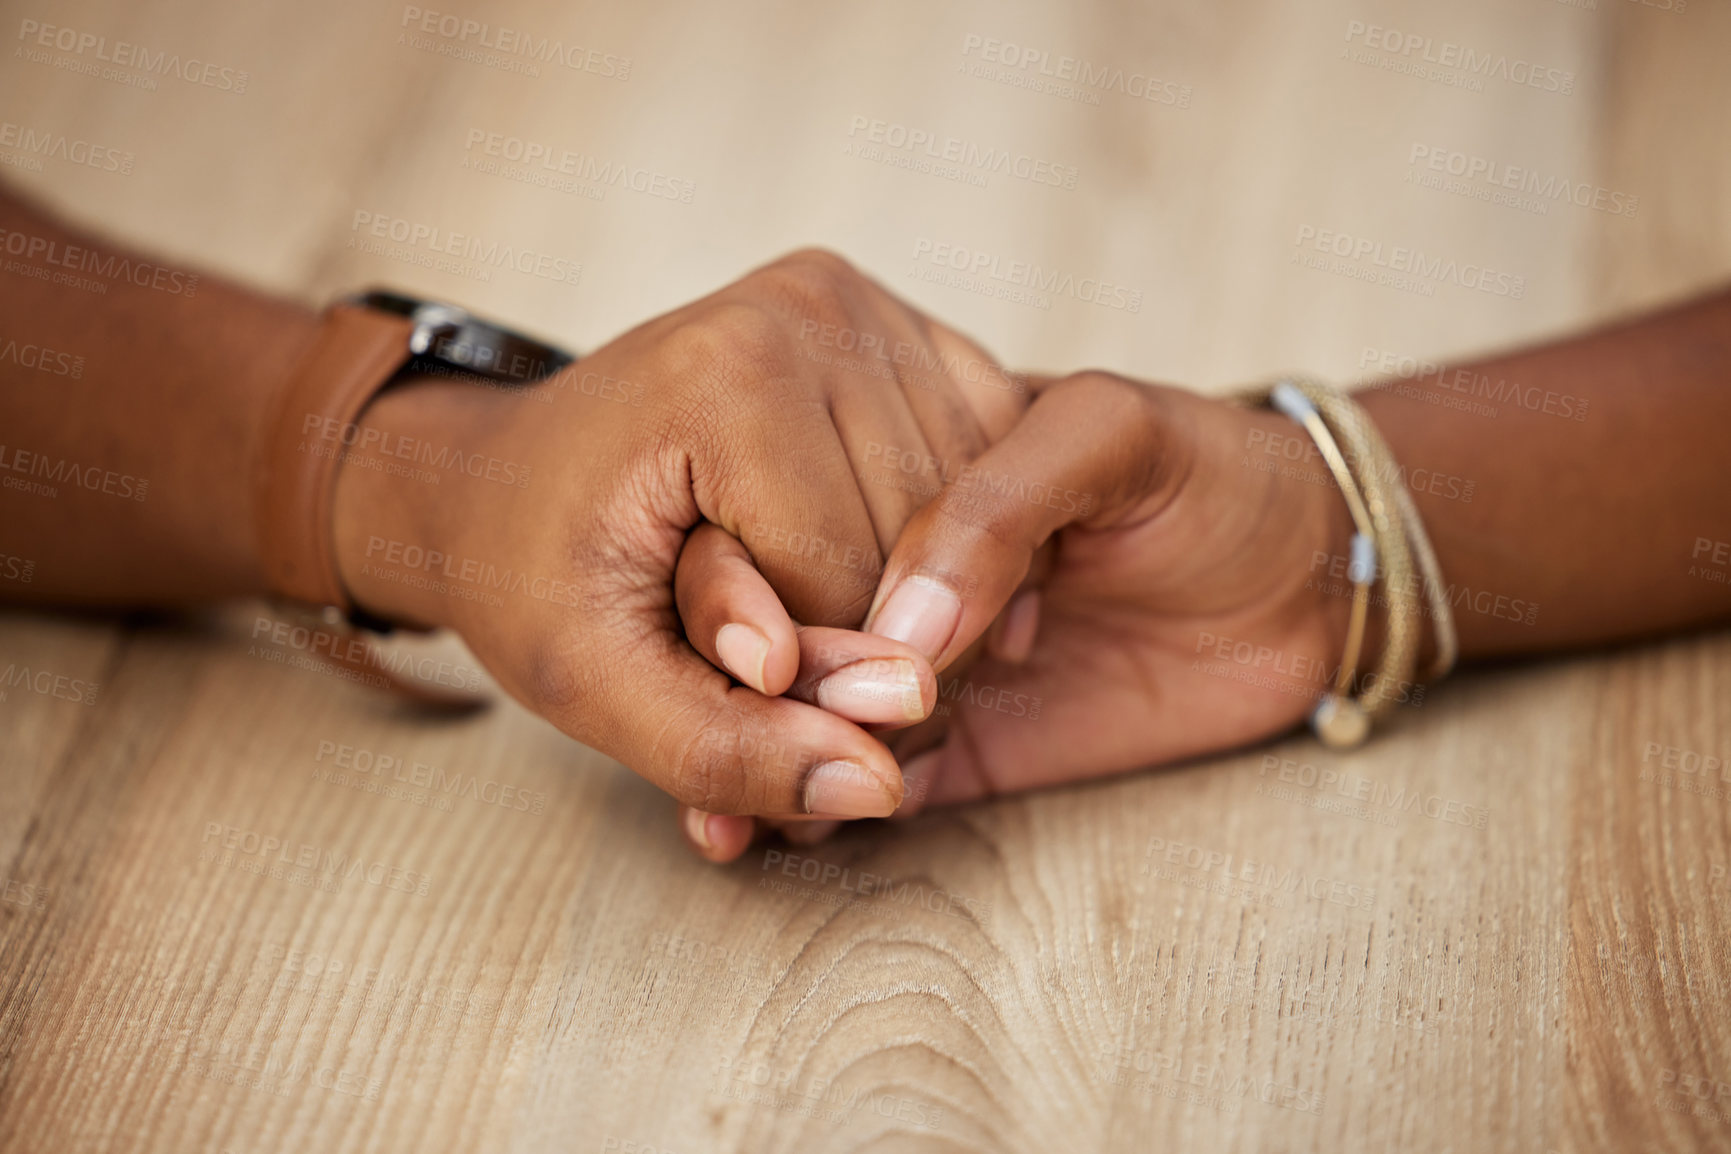 Buy stock photo Shot of two unrecognizable people holding hands at home